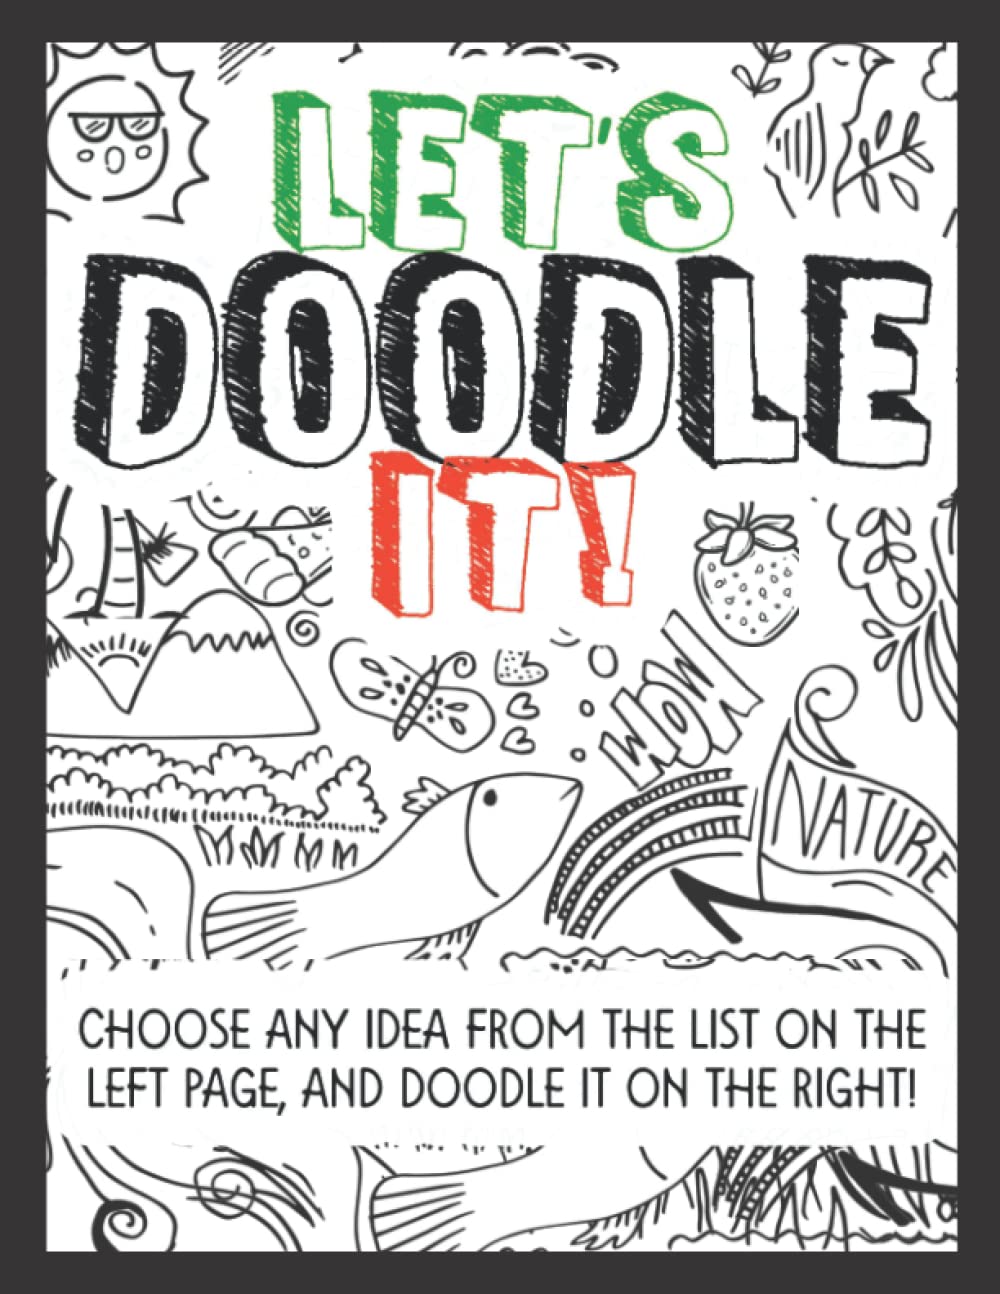 Let's Doodle It!: Sketchbook with many ideas to choose from